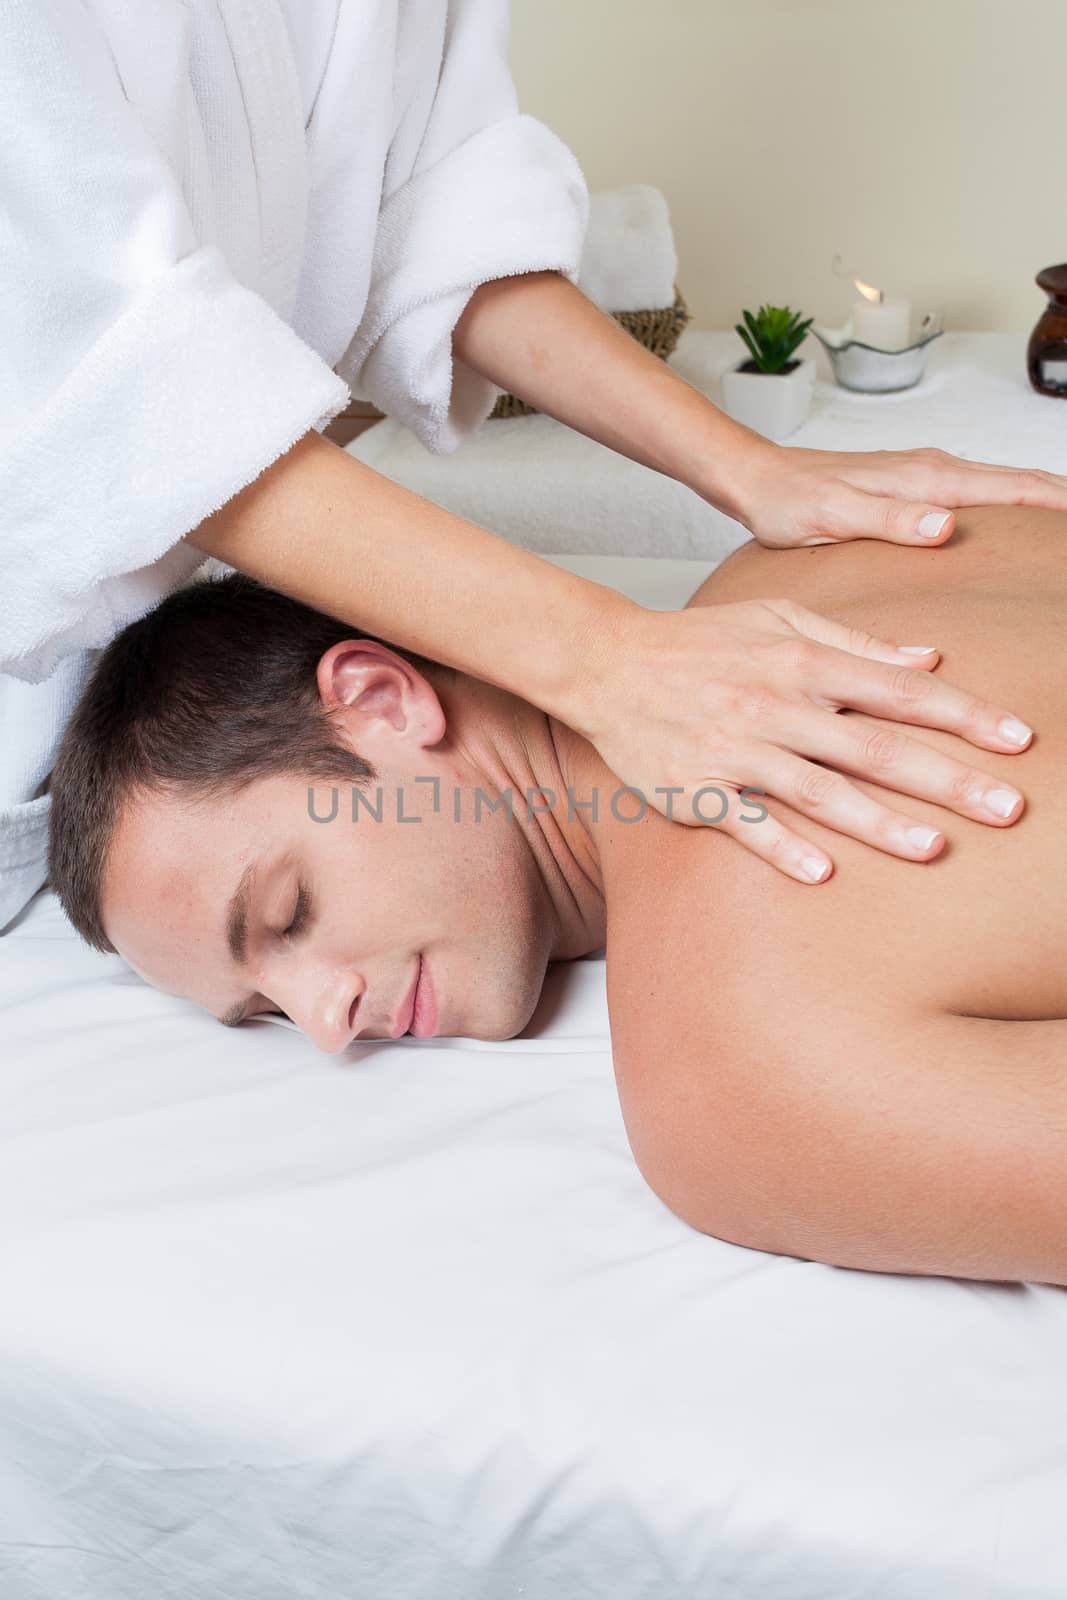 Smiling man gets a massage by ifilms